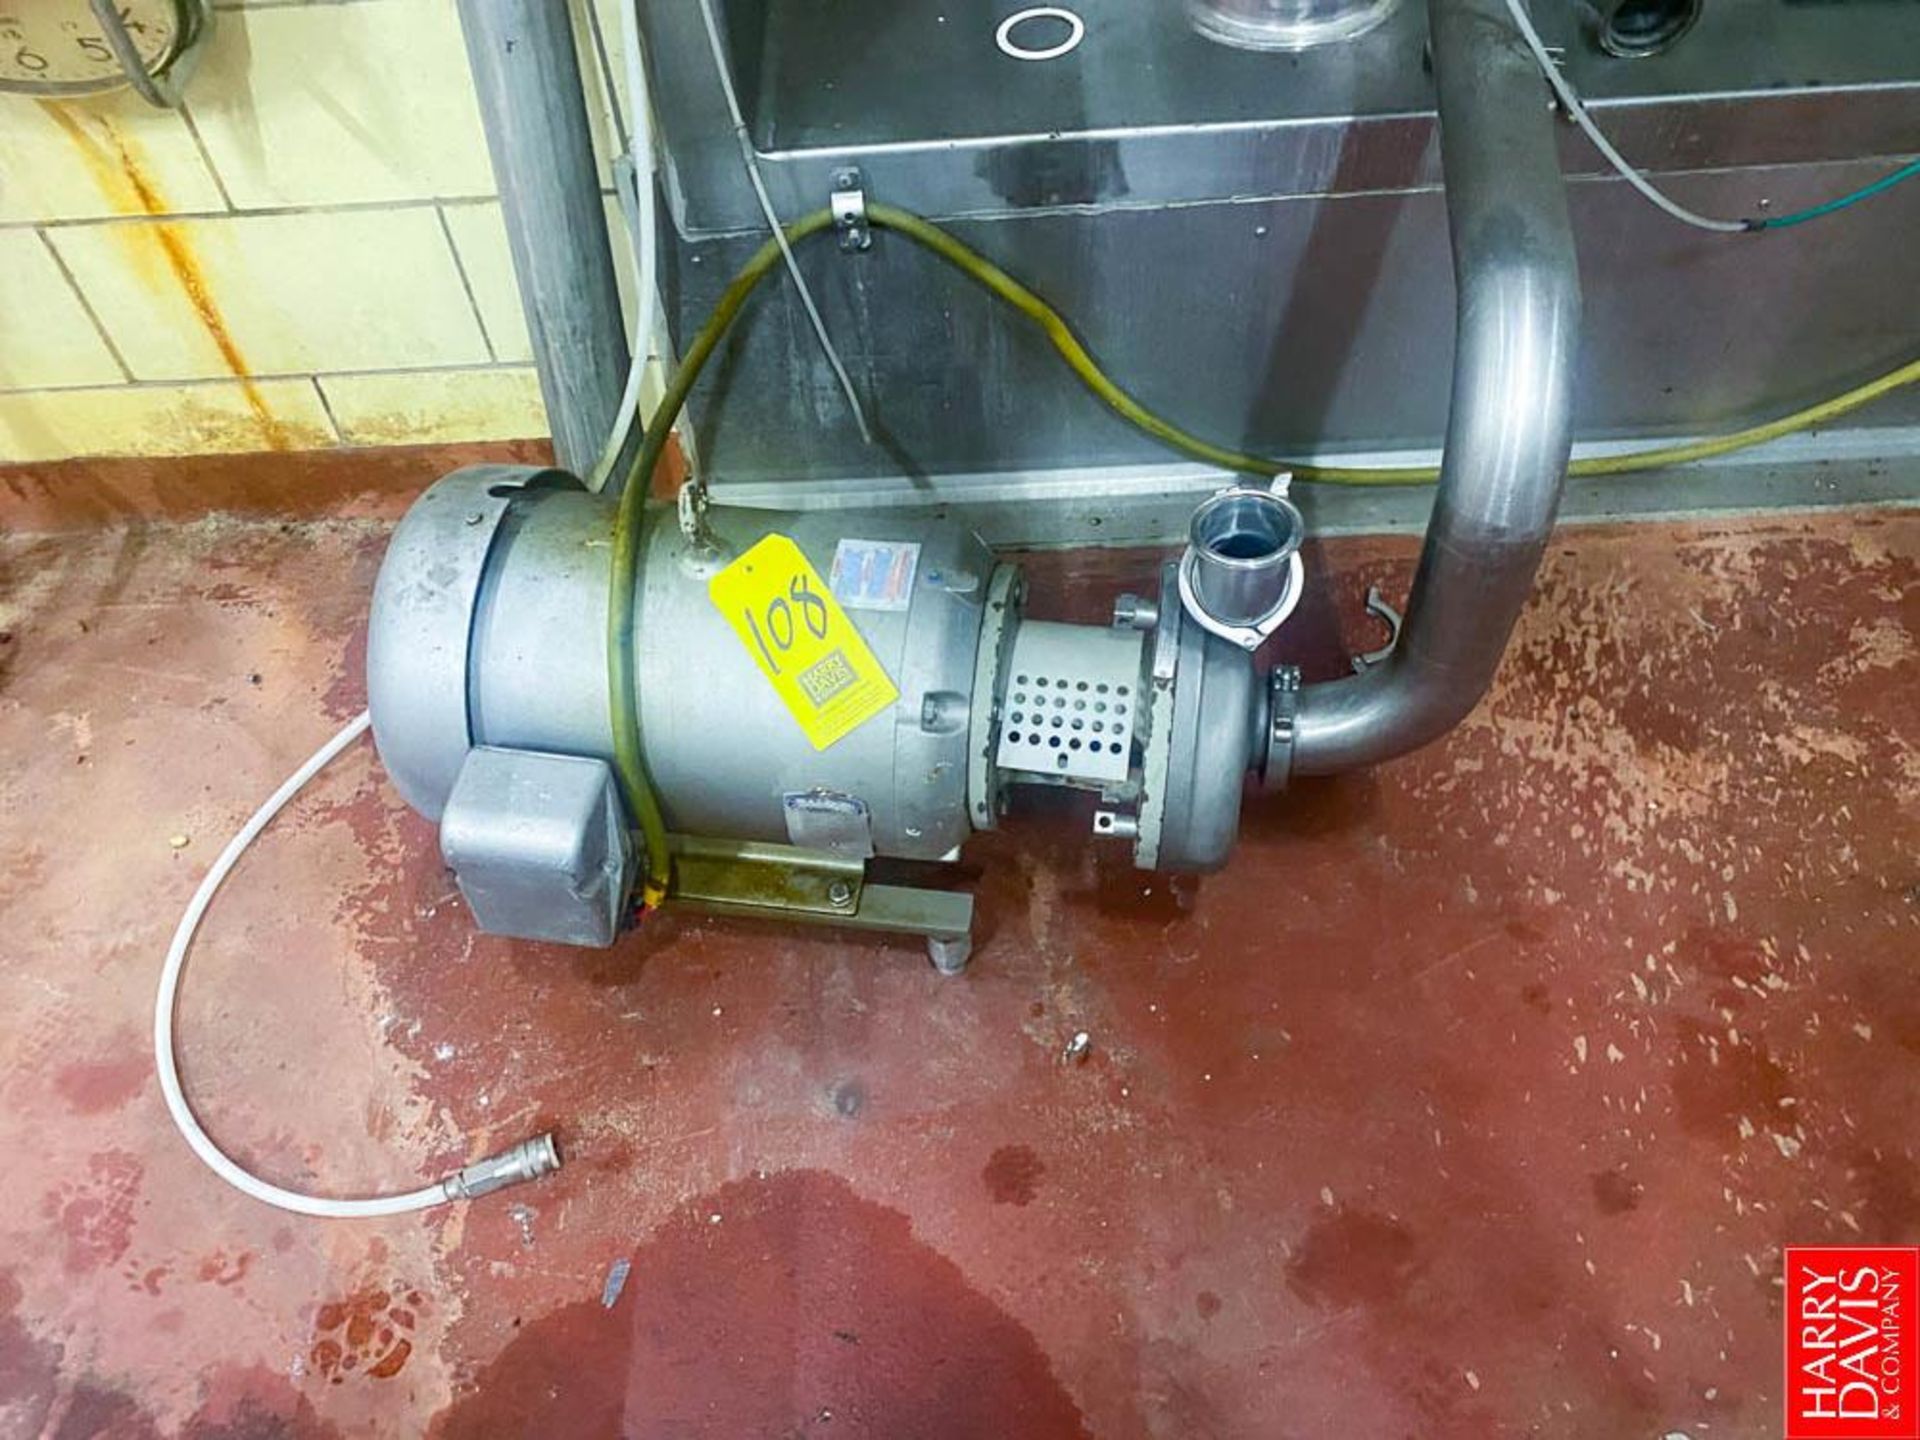 Fristam 15 Hp. Centrifugal Pump Model FT401-205, and S/S Clamp Type Head, 3''Inlet/Outlet Rigging